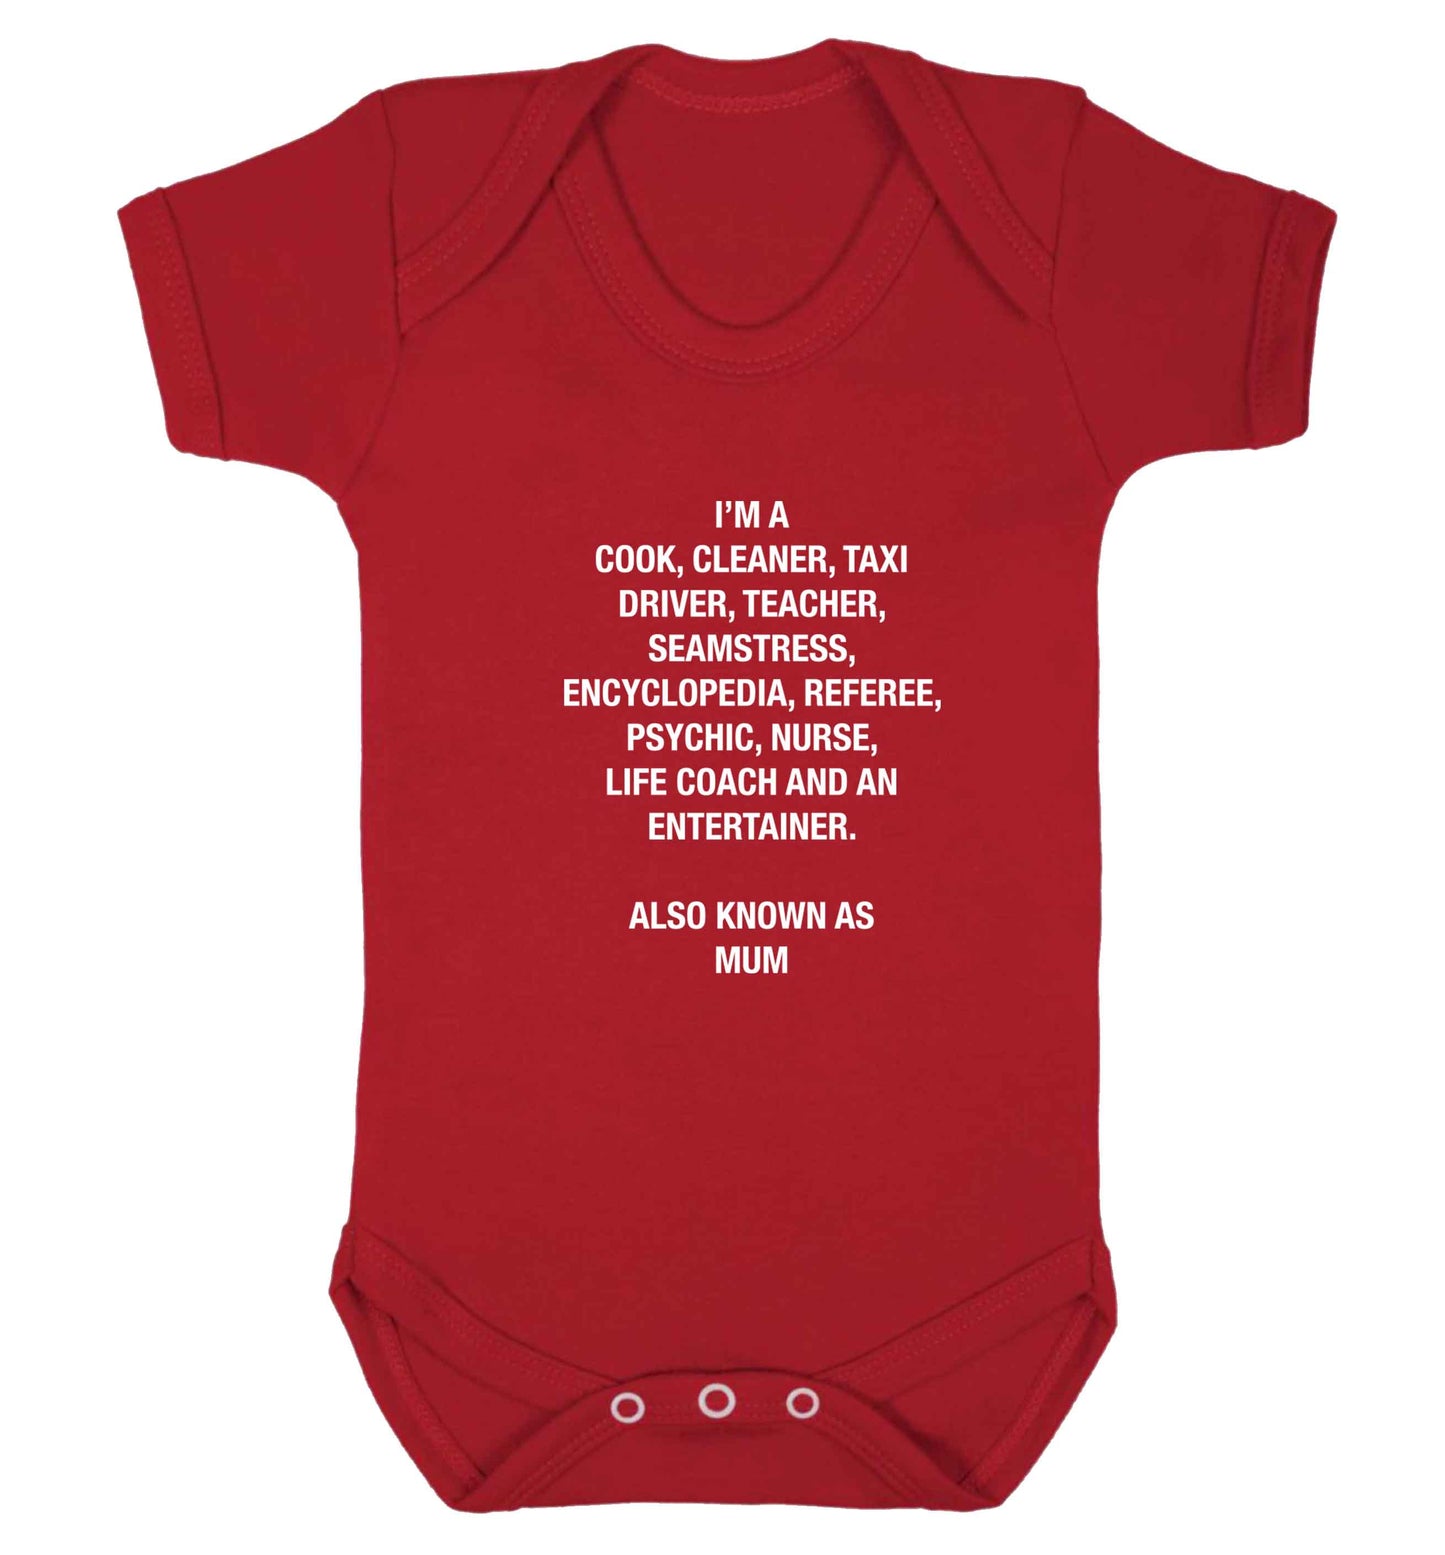 Funny gifts for your mum on mother's dayor her birthday! Mum, cook, cleaner, taxi driver, teacher, seamstress, encyclopedia, referee, psychic, nurse, life coach and entertainer baby vest red 18-24 months